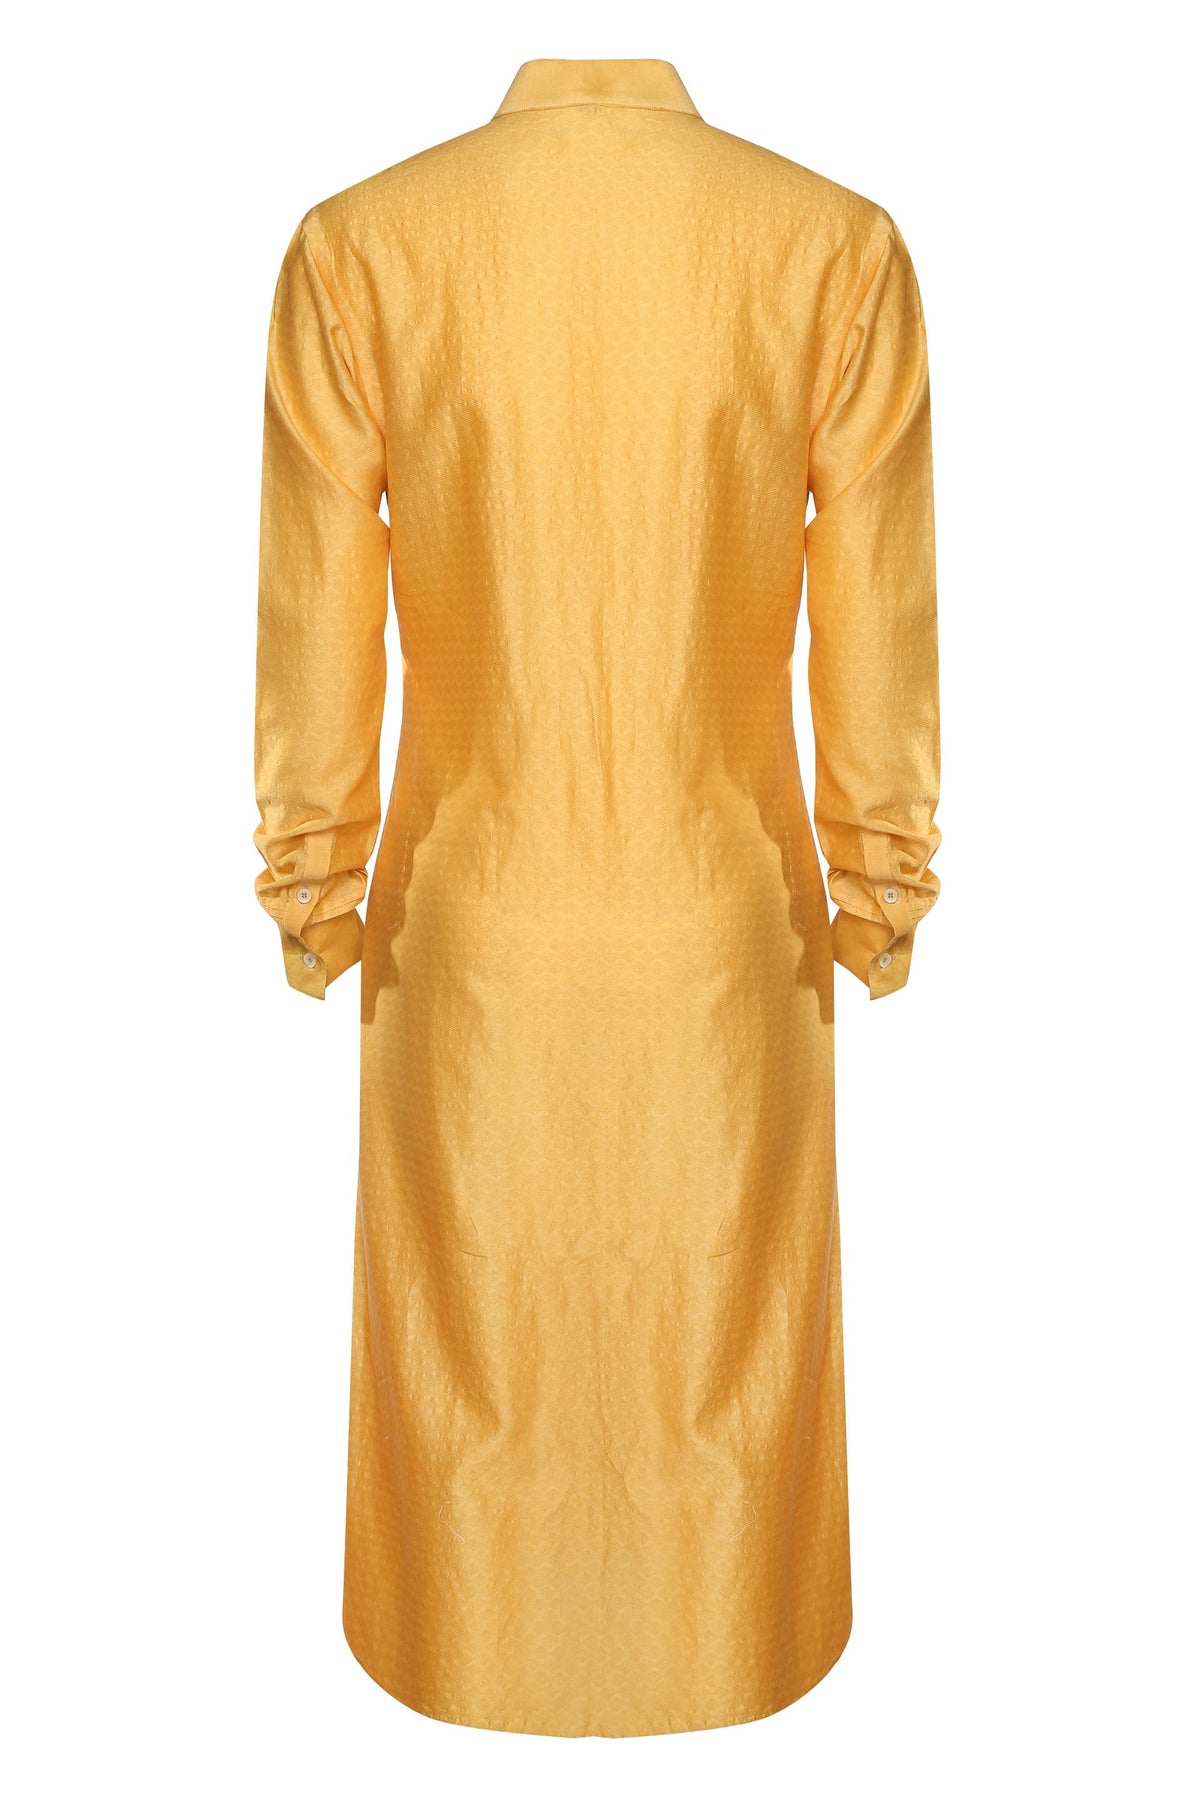 BRIGHT MUSTARD COLORED COTTON KURTA WITH INTRICATE TAILORING DETAILS